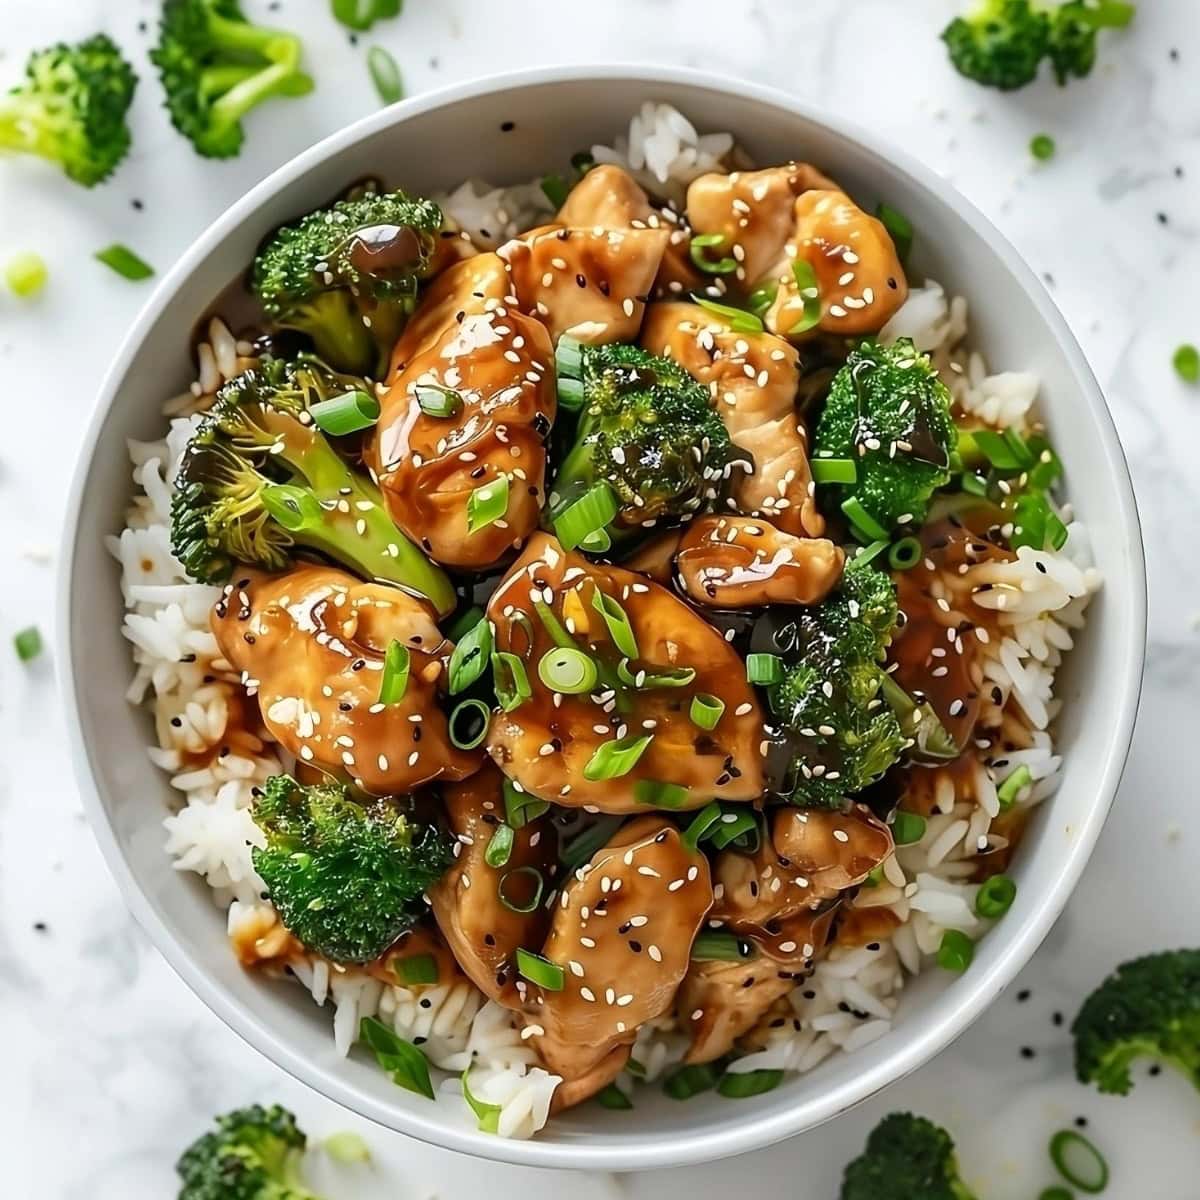 Top view of a bowl of rice with stir fried chicken and broccoli on top.
